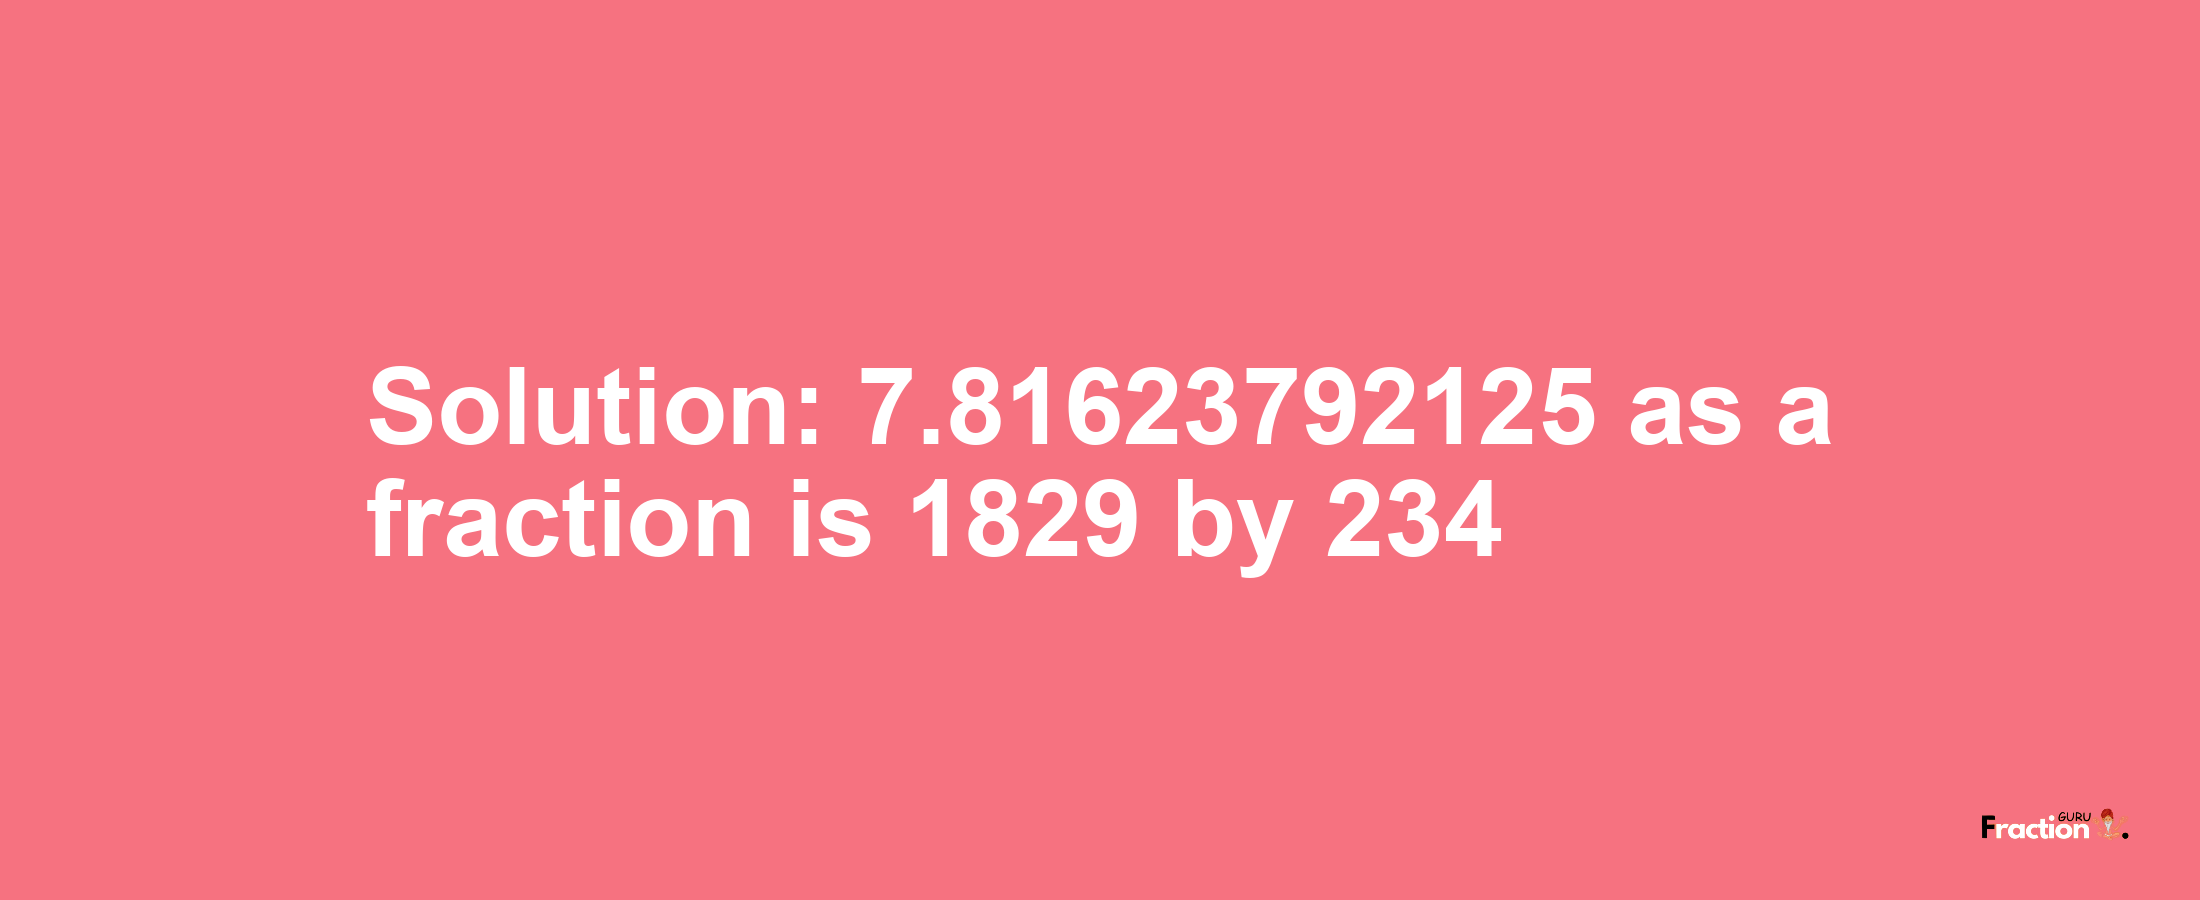 Solution:7.81623792125 as a fraction is 1829/234